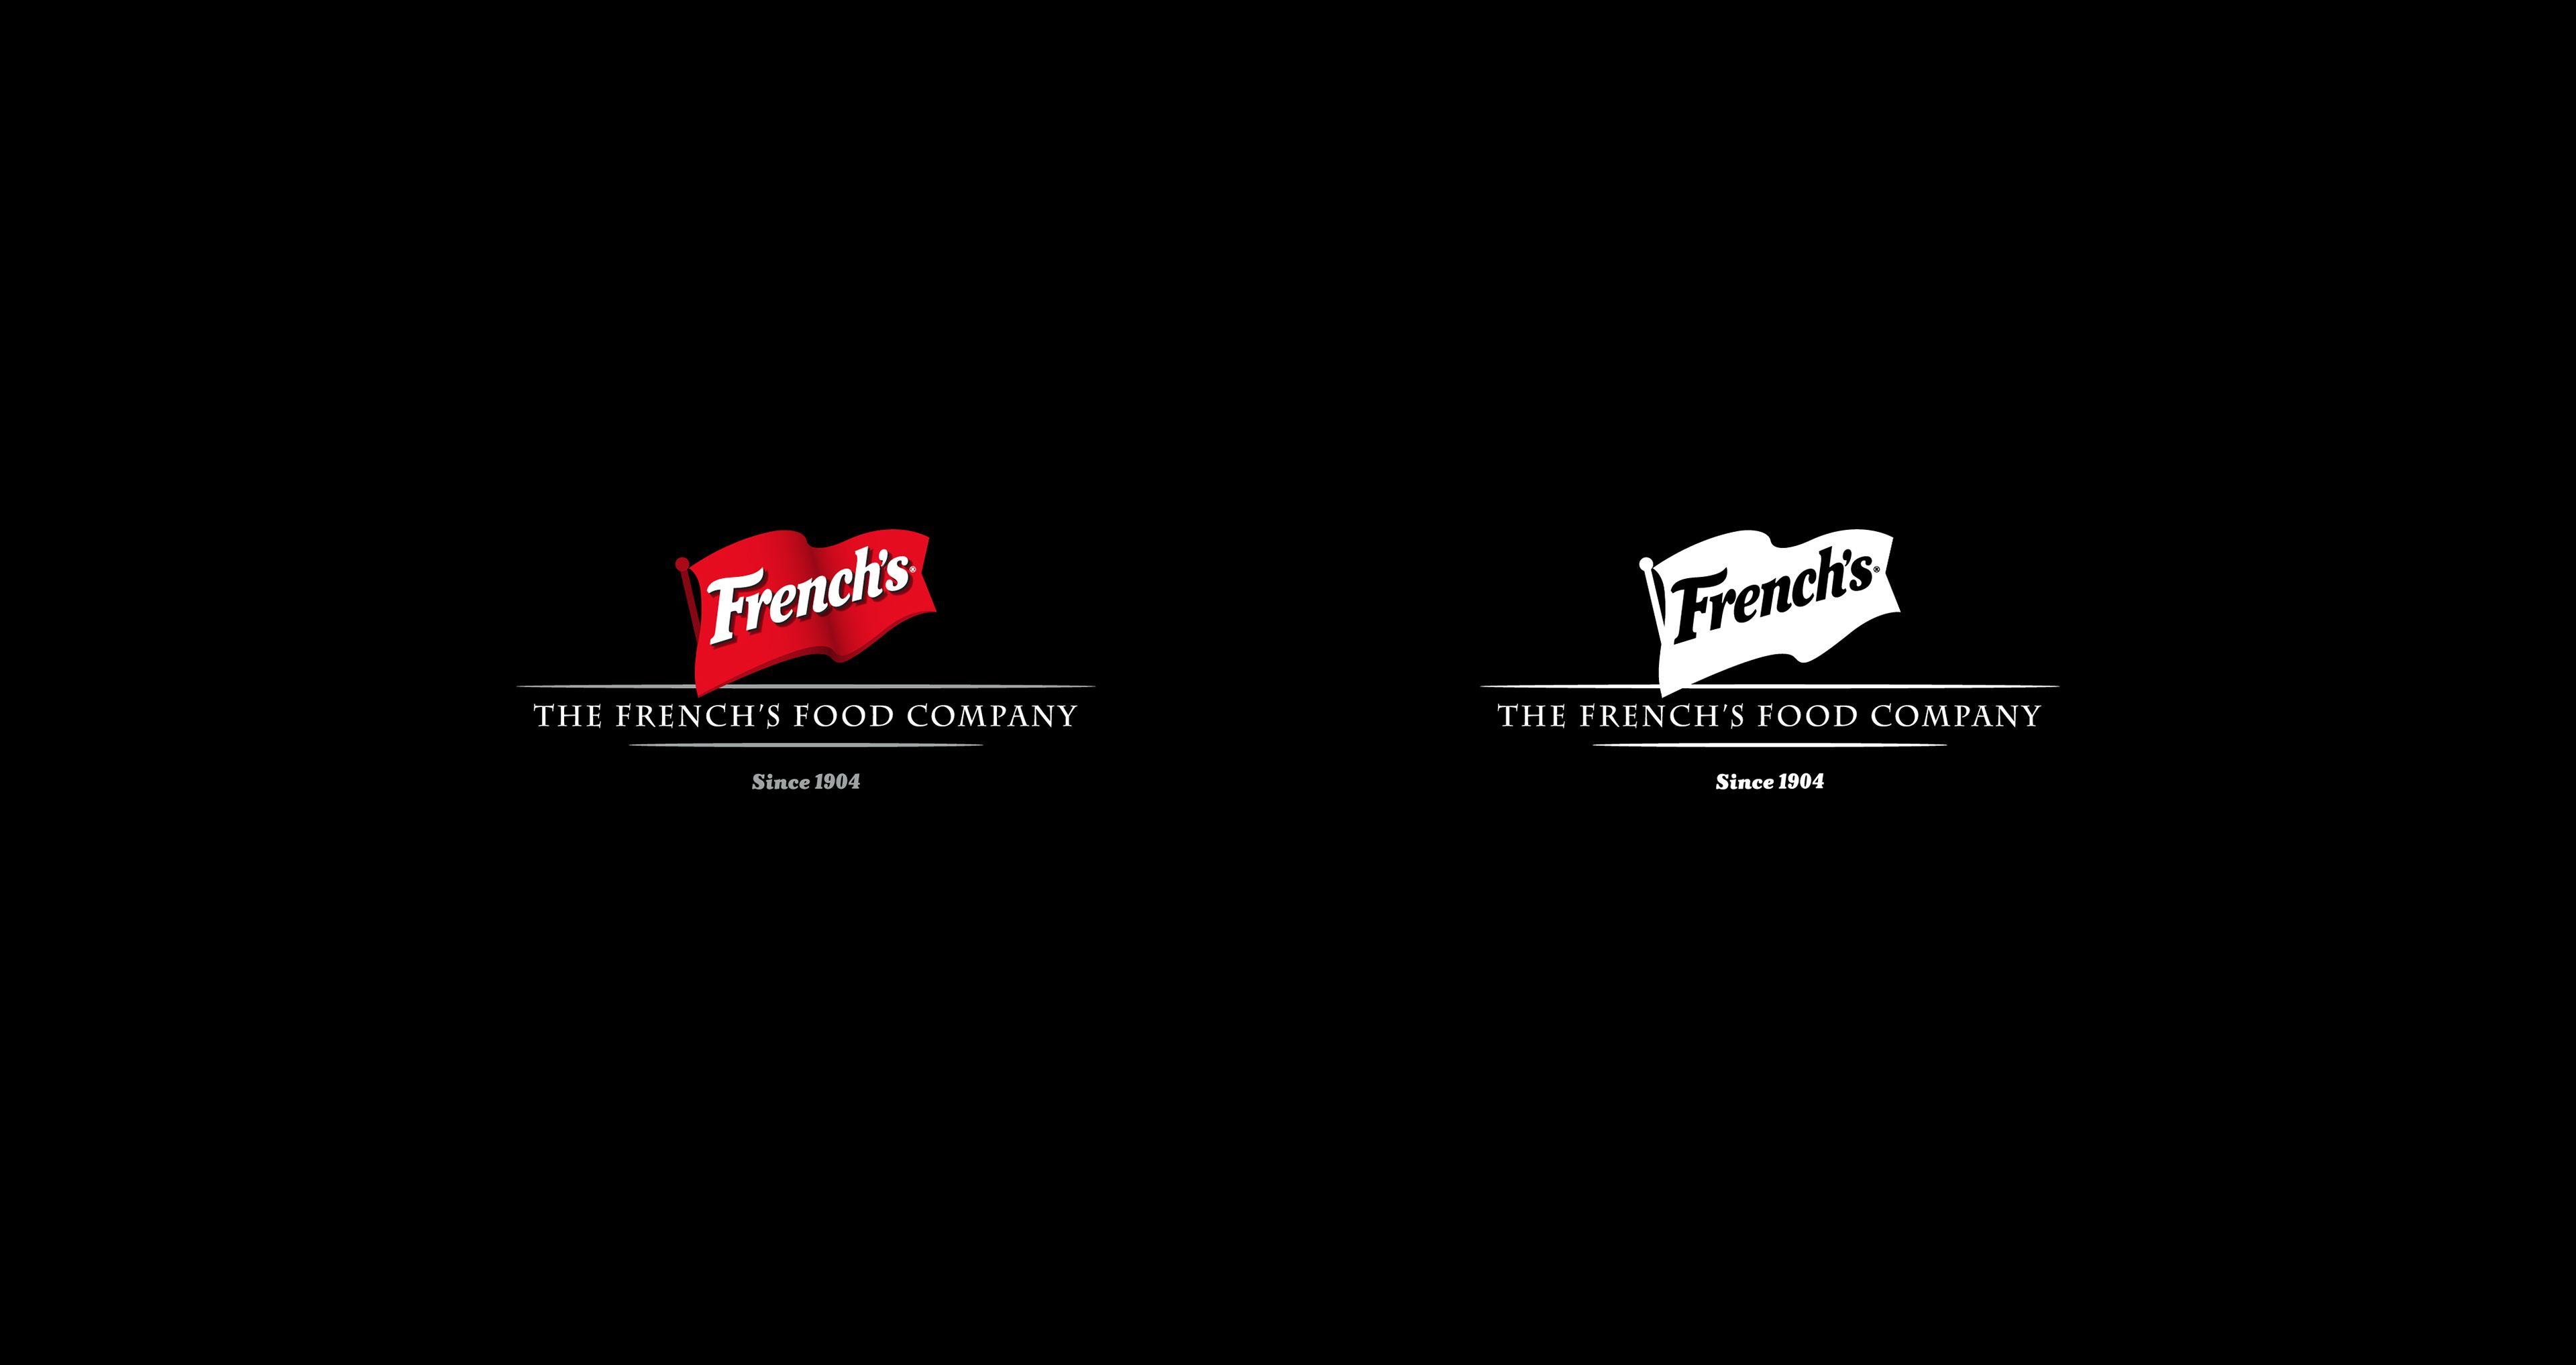 French Food Company Logo - The French's Food Company on Behance